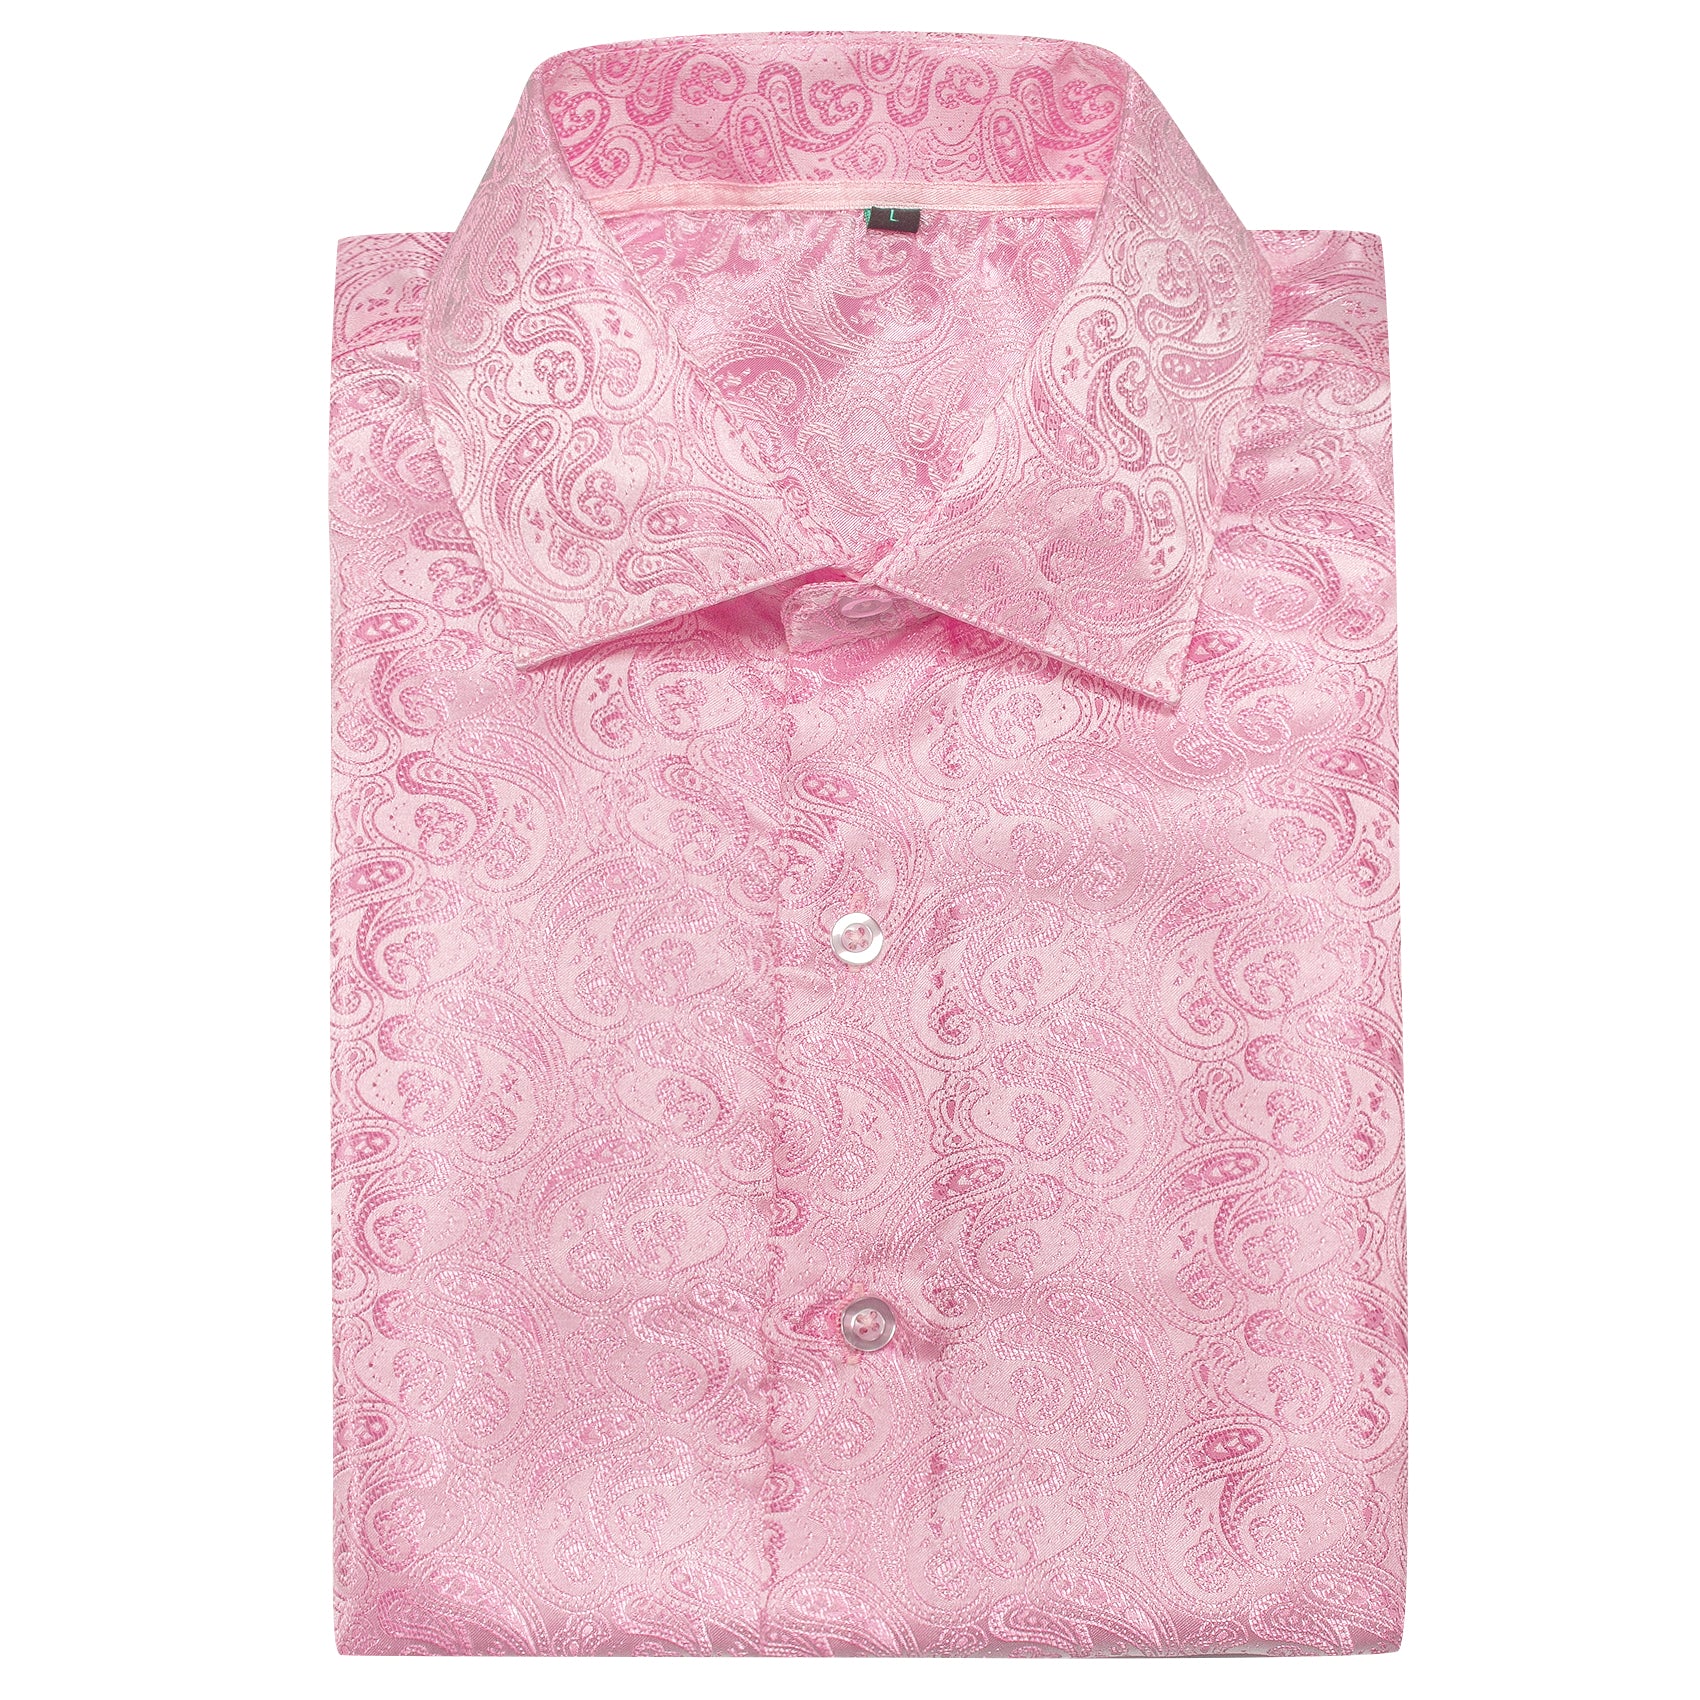 in style dress shirts